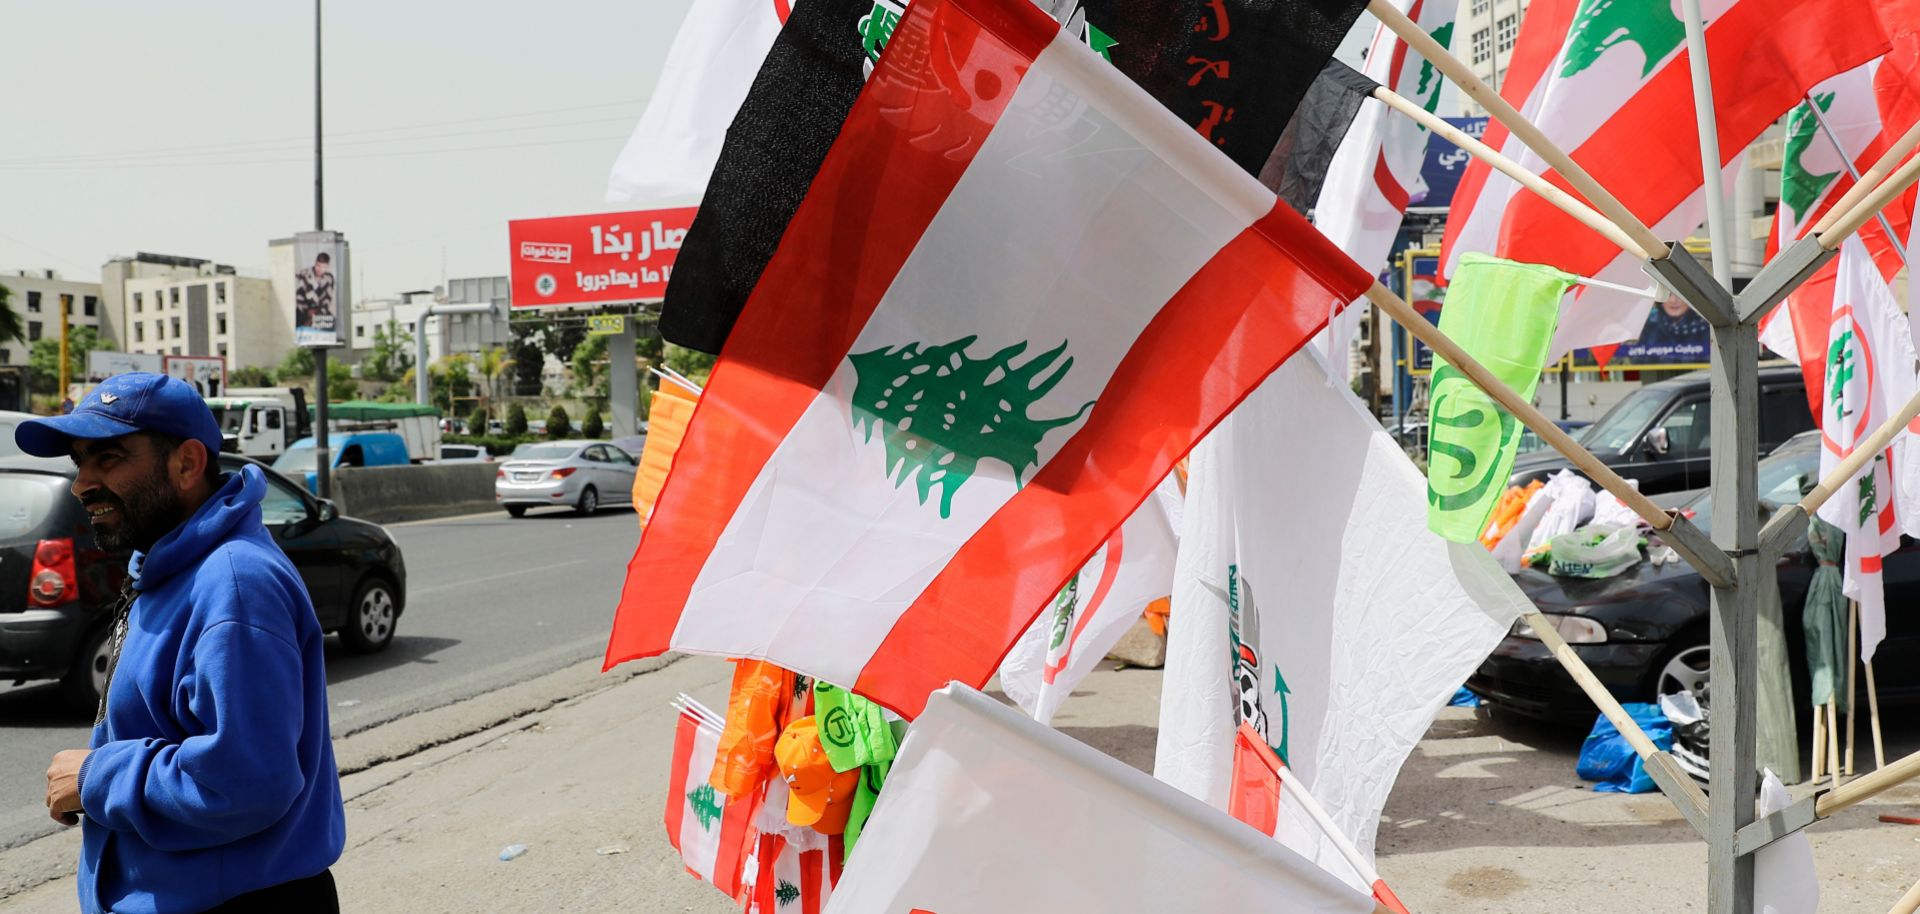 In this photograph from Lebanon, a vendor sells national and party flags near Beirut on May 2, 2018, ahead of parliamentary elections.